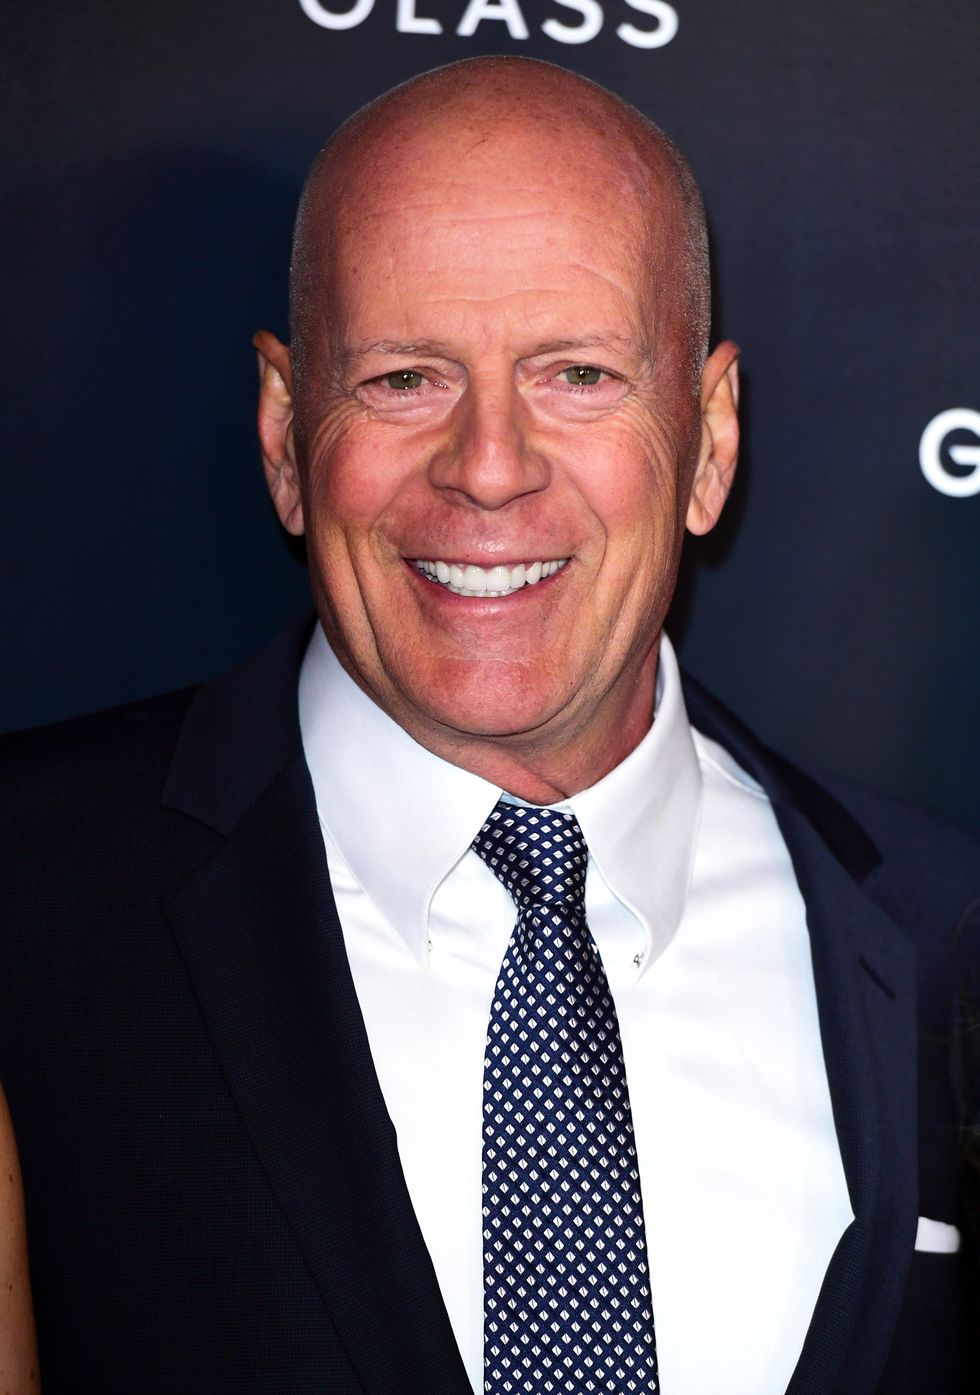 Bruce Willis cuddles puppy in first family photos since retirement due to health